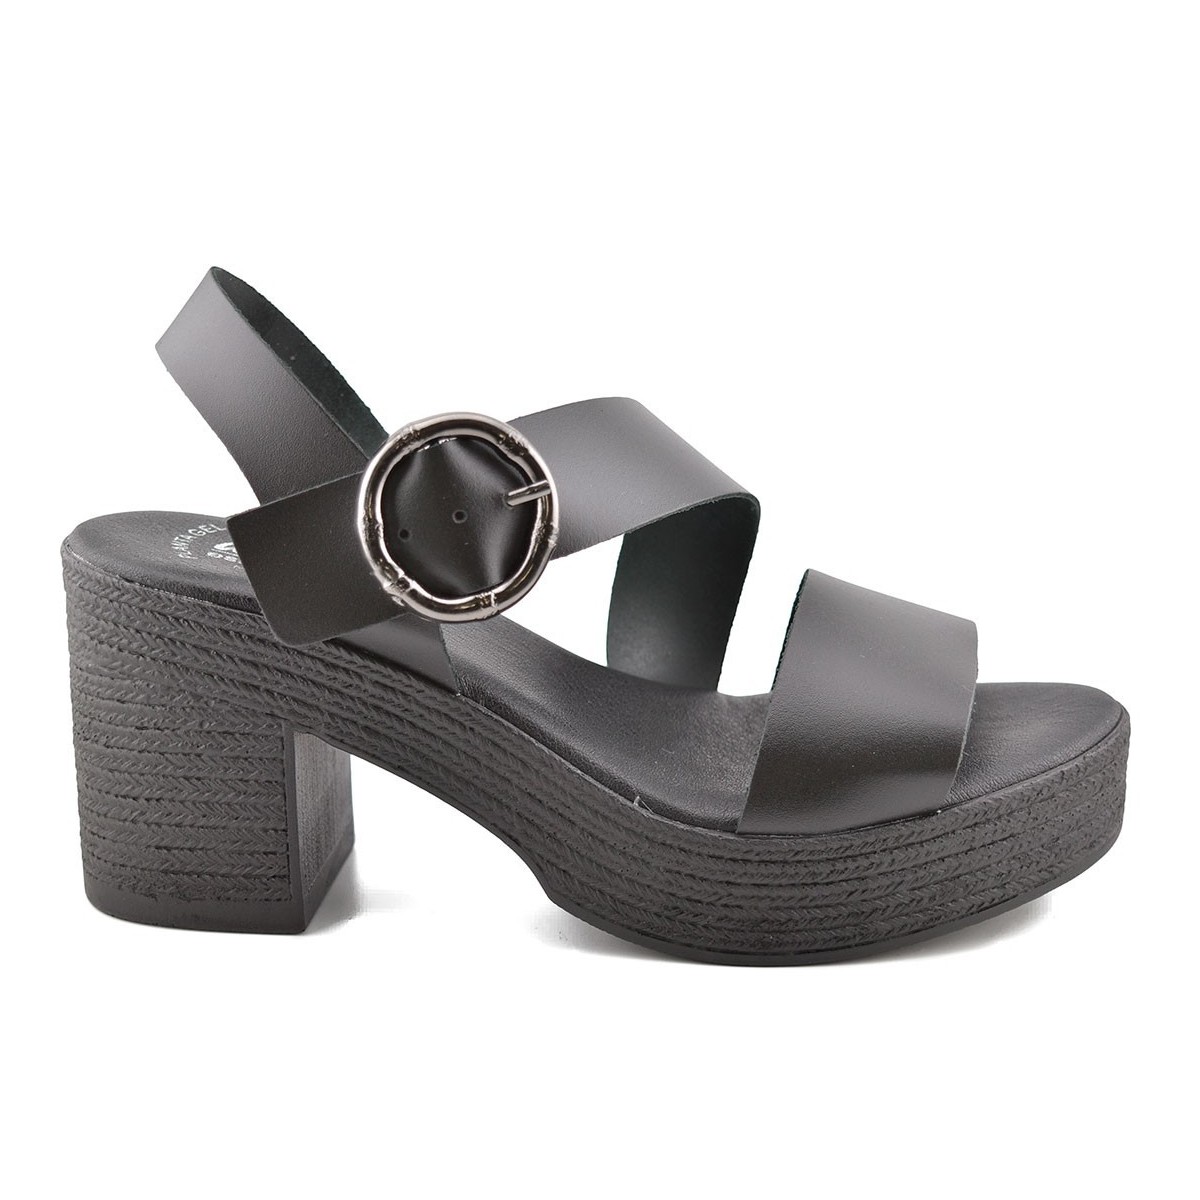 Black leather sandals with high heel by Amelie